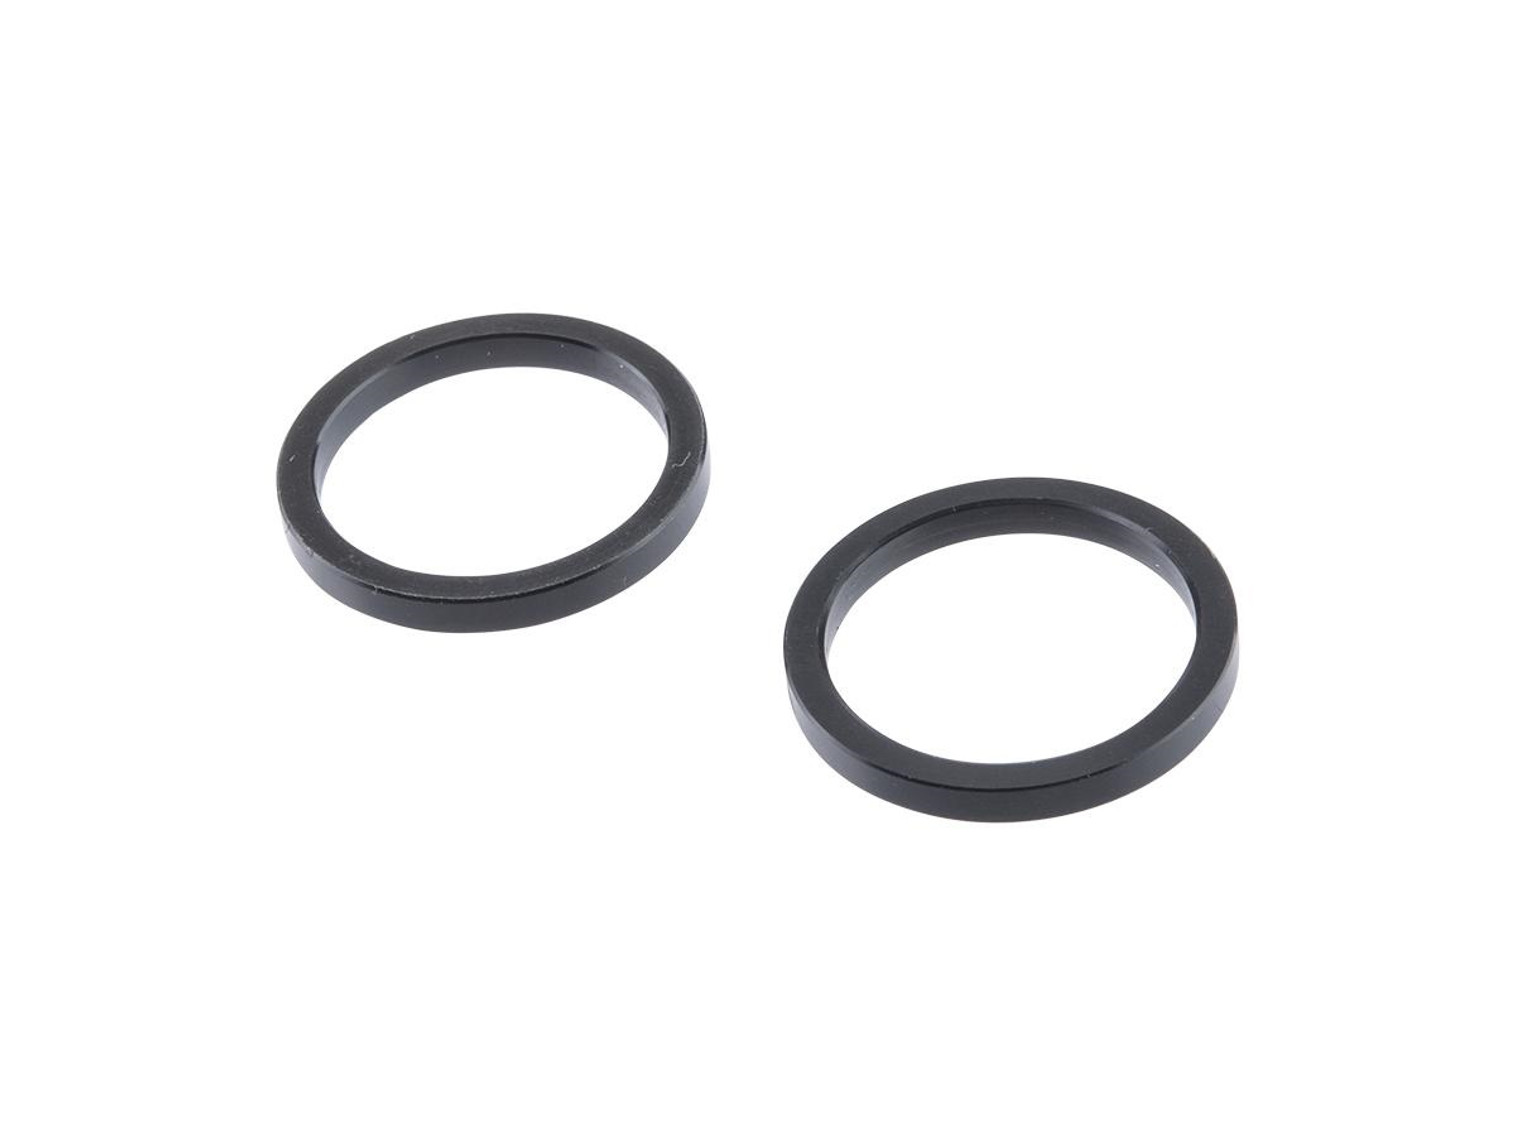 MODIFY TECH POM Extra Tight Glide Rings for MOD24 Airsoft Sniper Rifles
